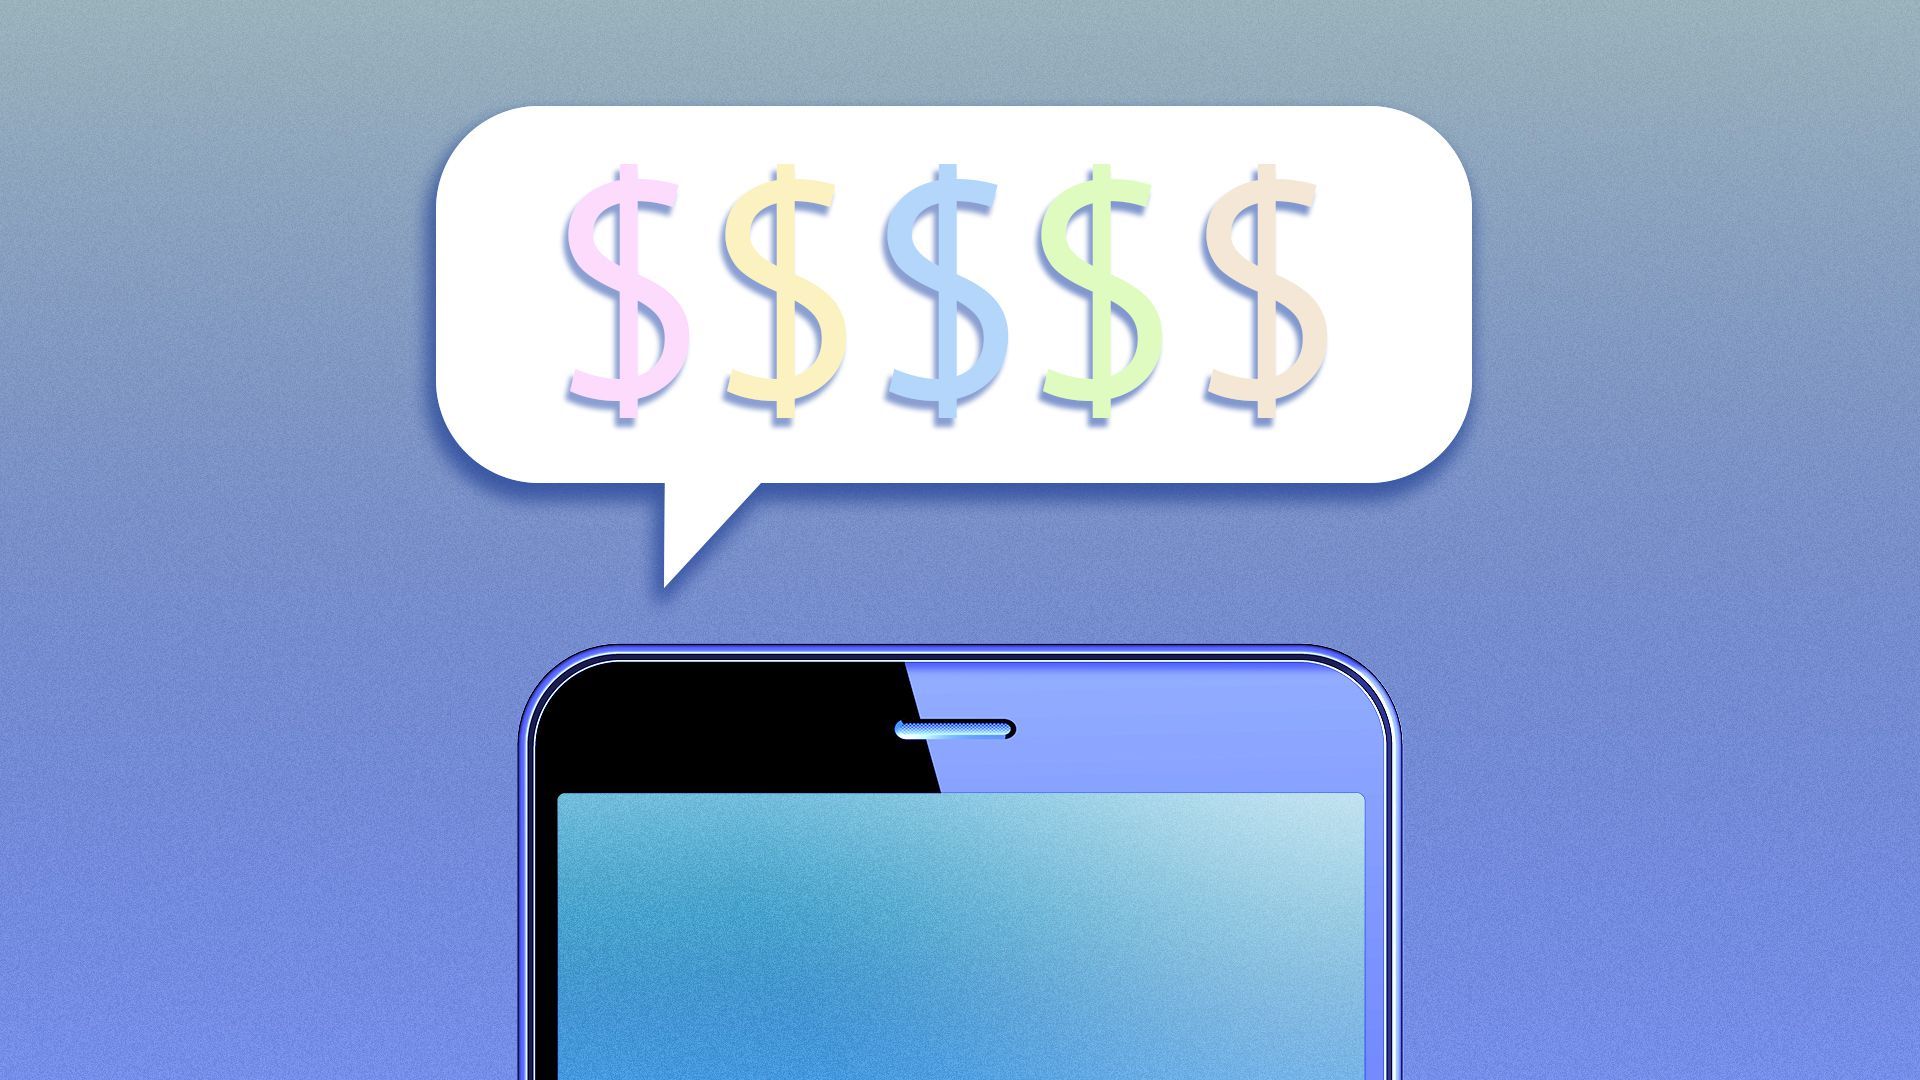 Illustration of a cellphone with a word bubble featuring five dollar signs in it